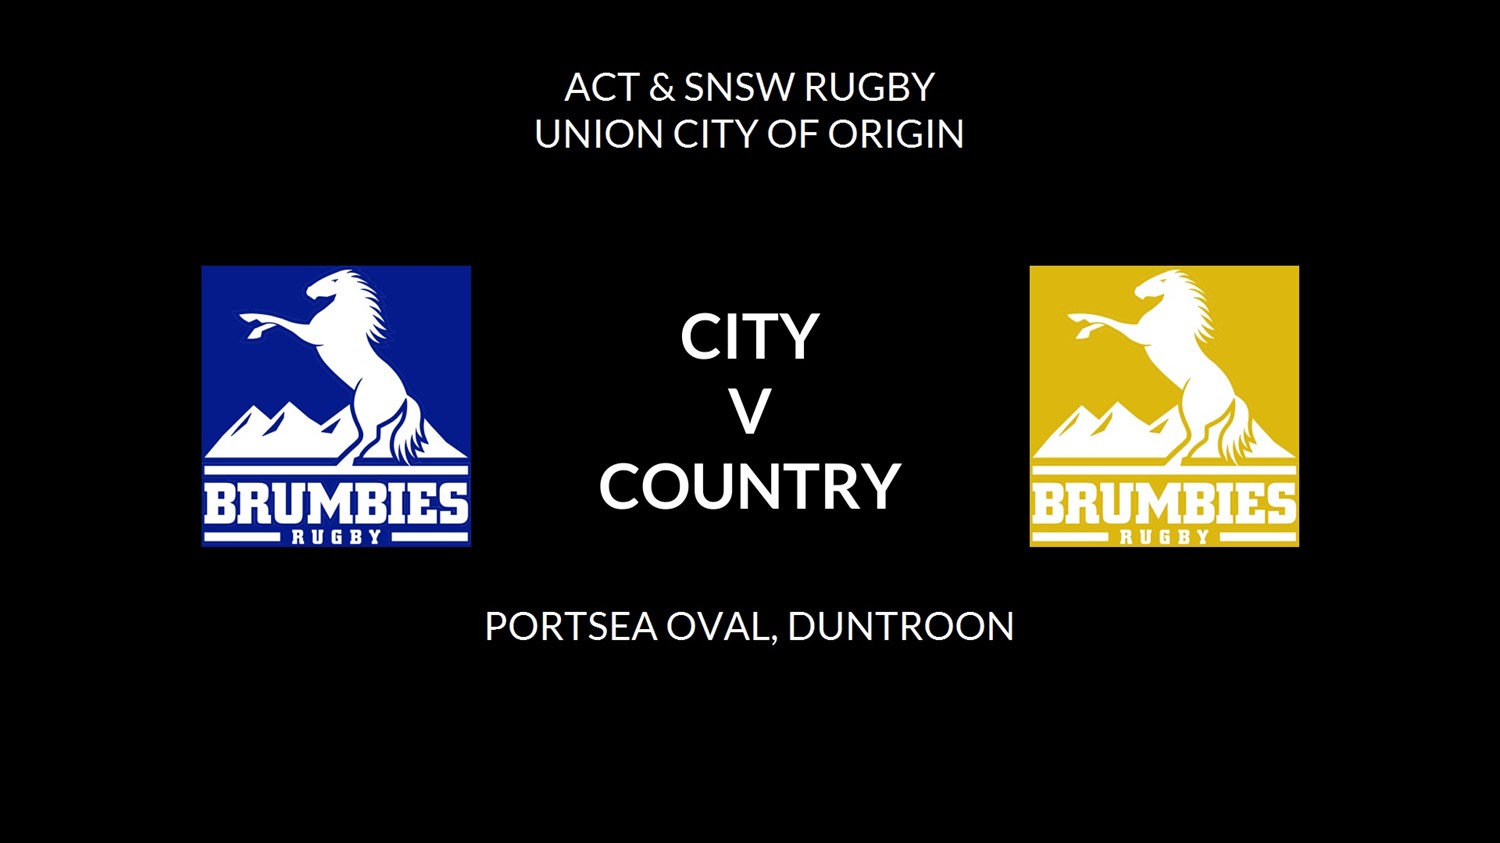 ACT & SNSW Rugby Union City of Origin - WOMEN'S - CITY v COUNTRY Slate Image